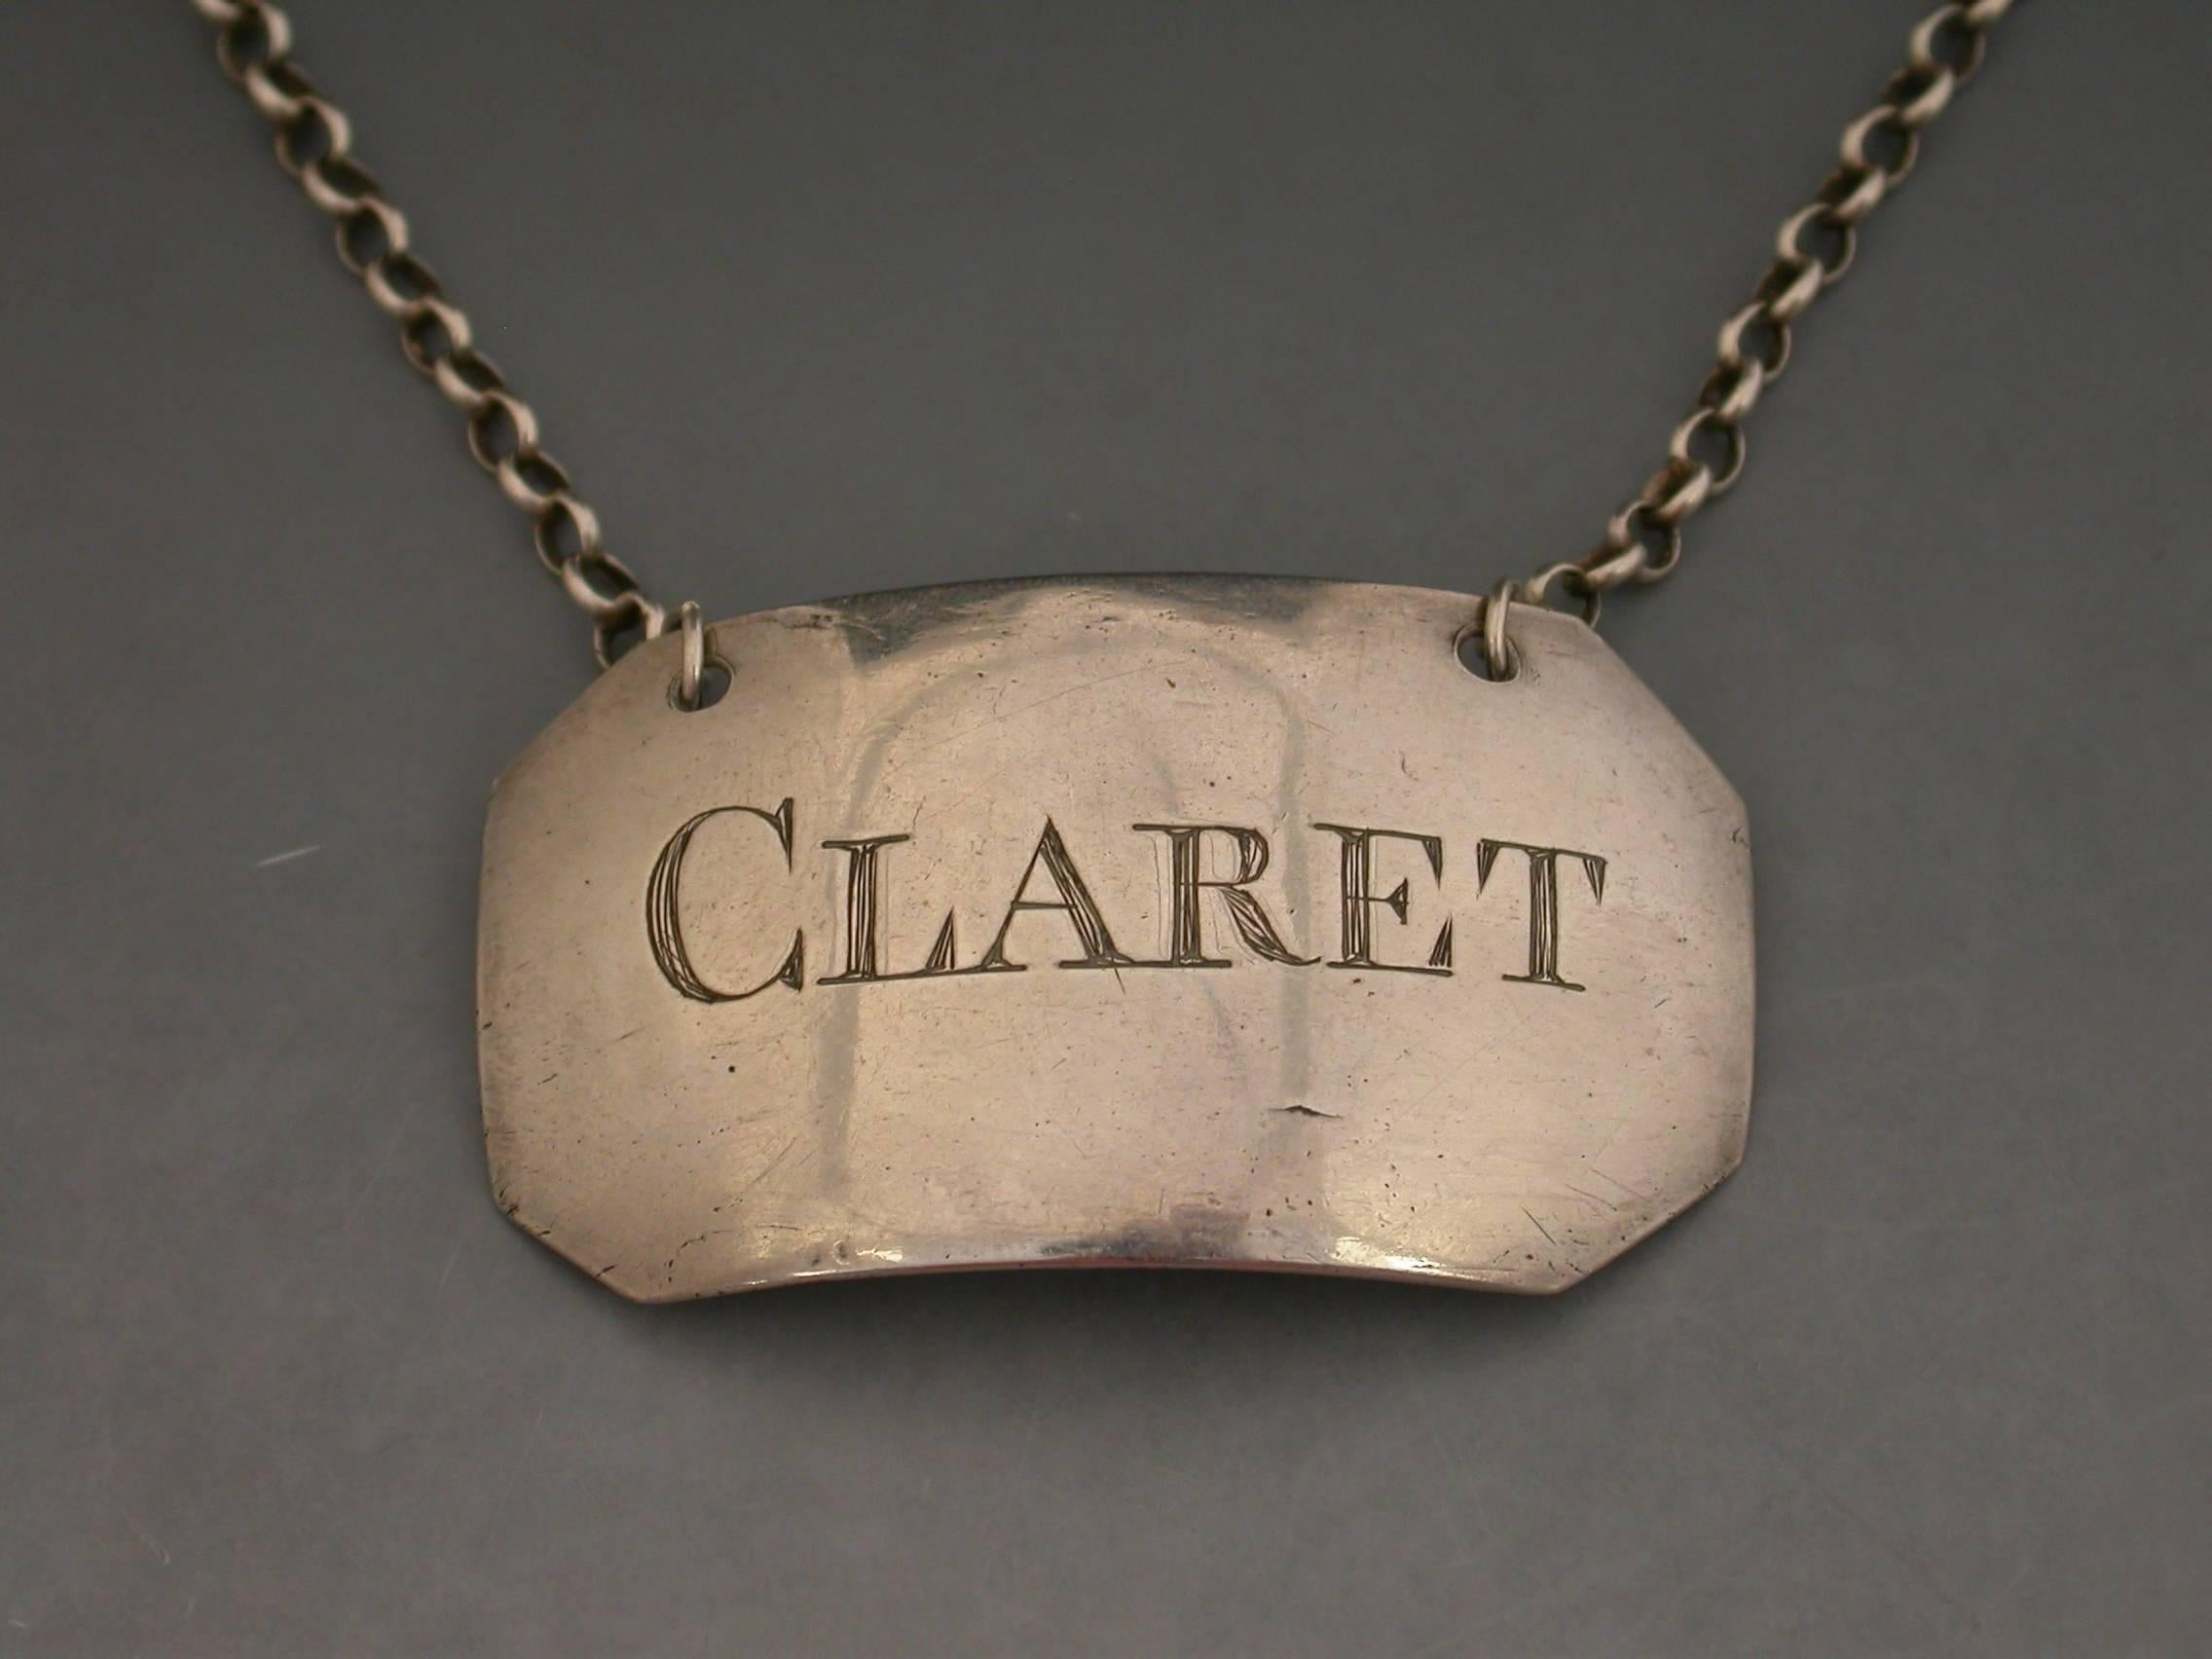 A George III silver wine label of plain broad rectangular form with cut-corners, incised for Claret. Possibly of Provincial origin.

Unmarked, circa 1790.

The larger capital letter 'C' in the title is characteristic of north country Wine